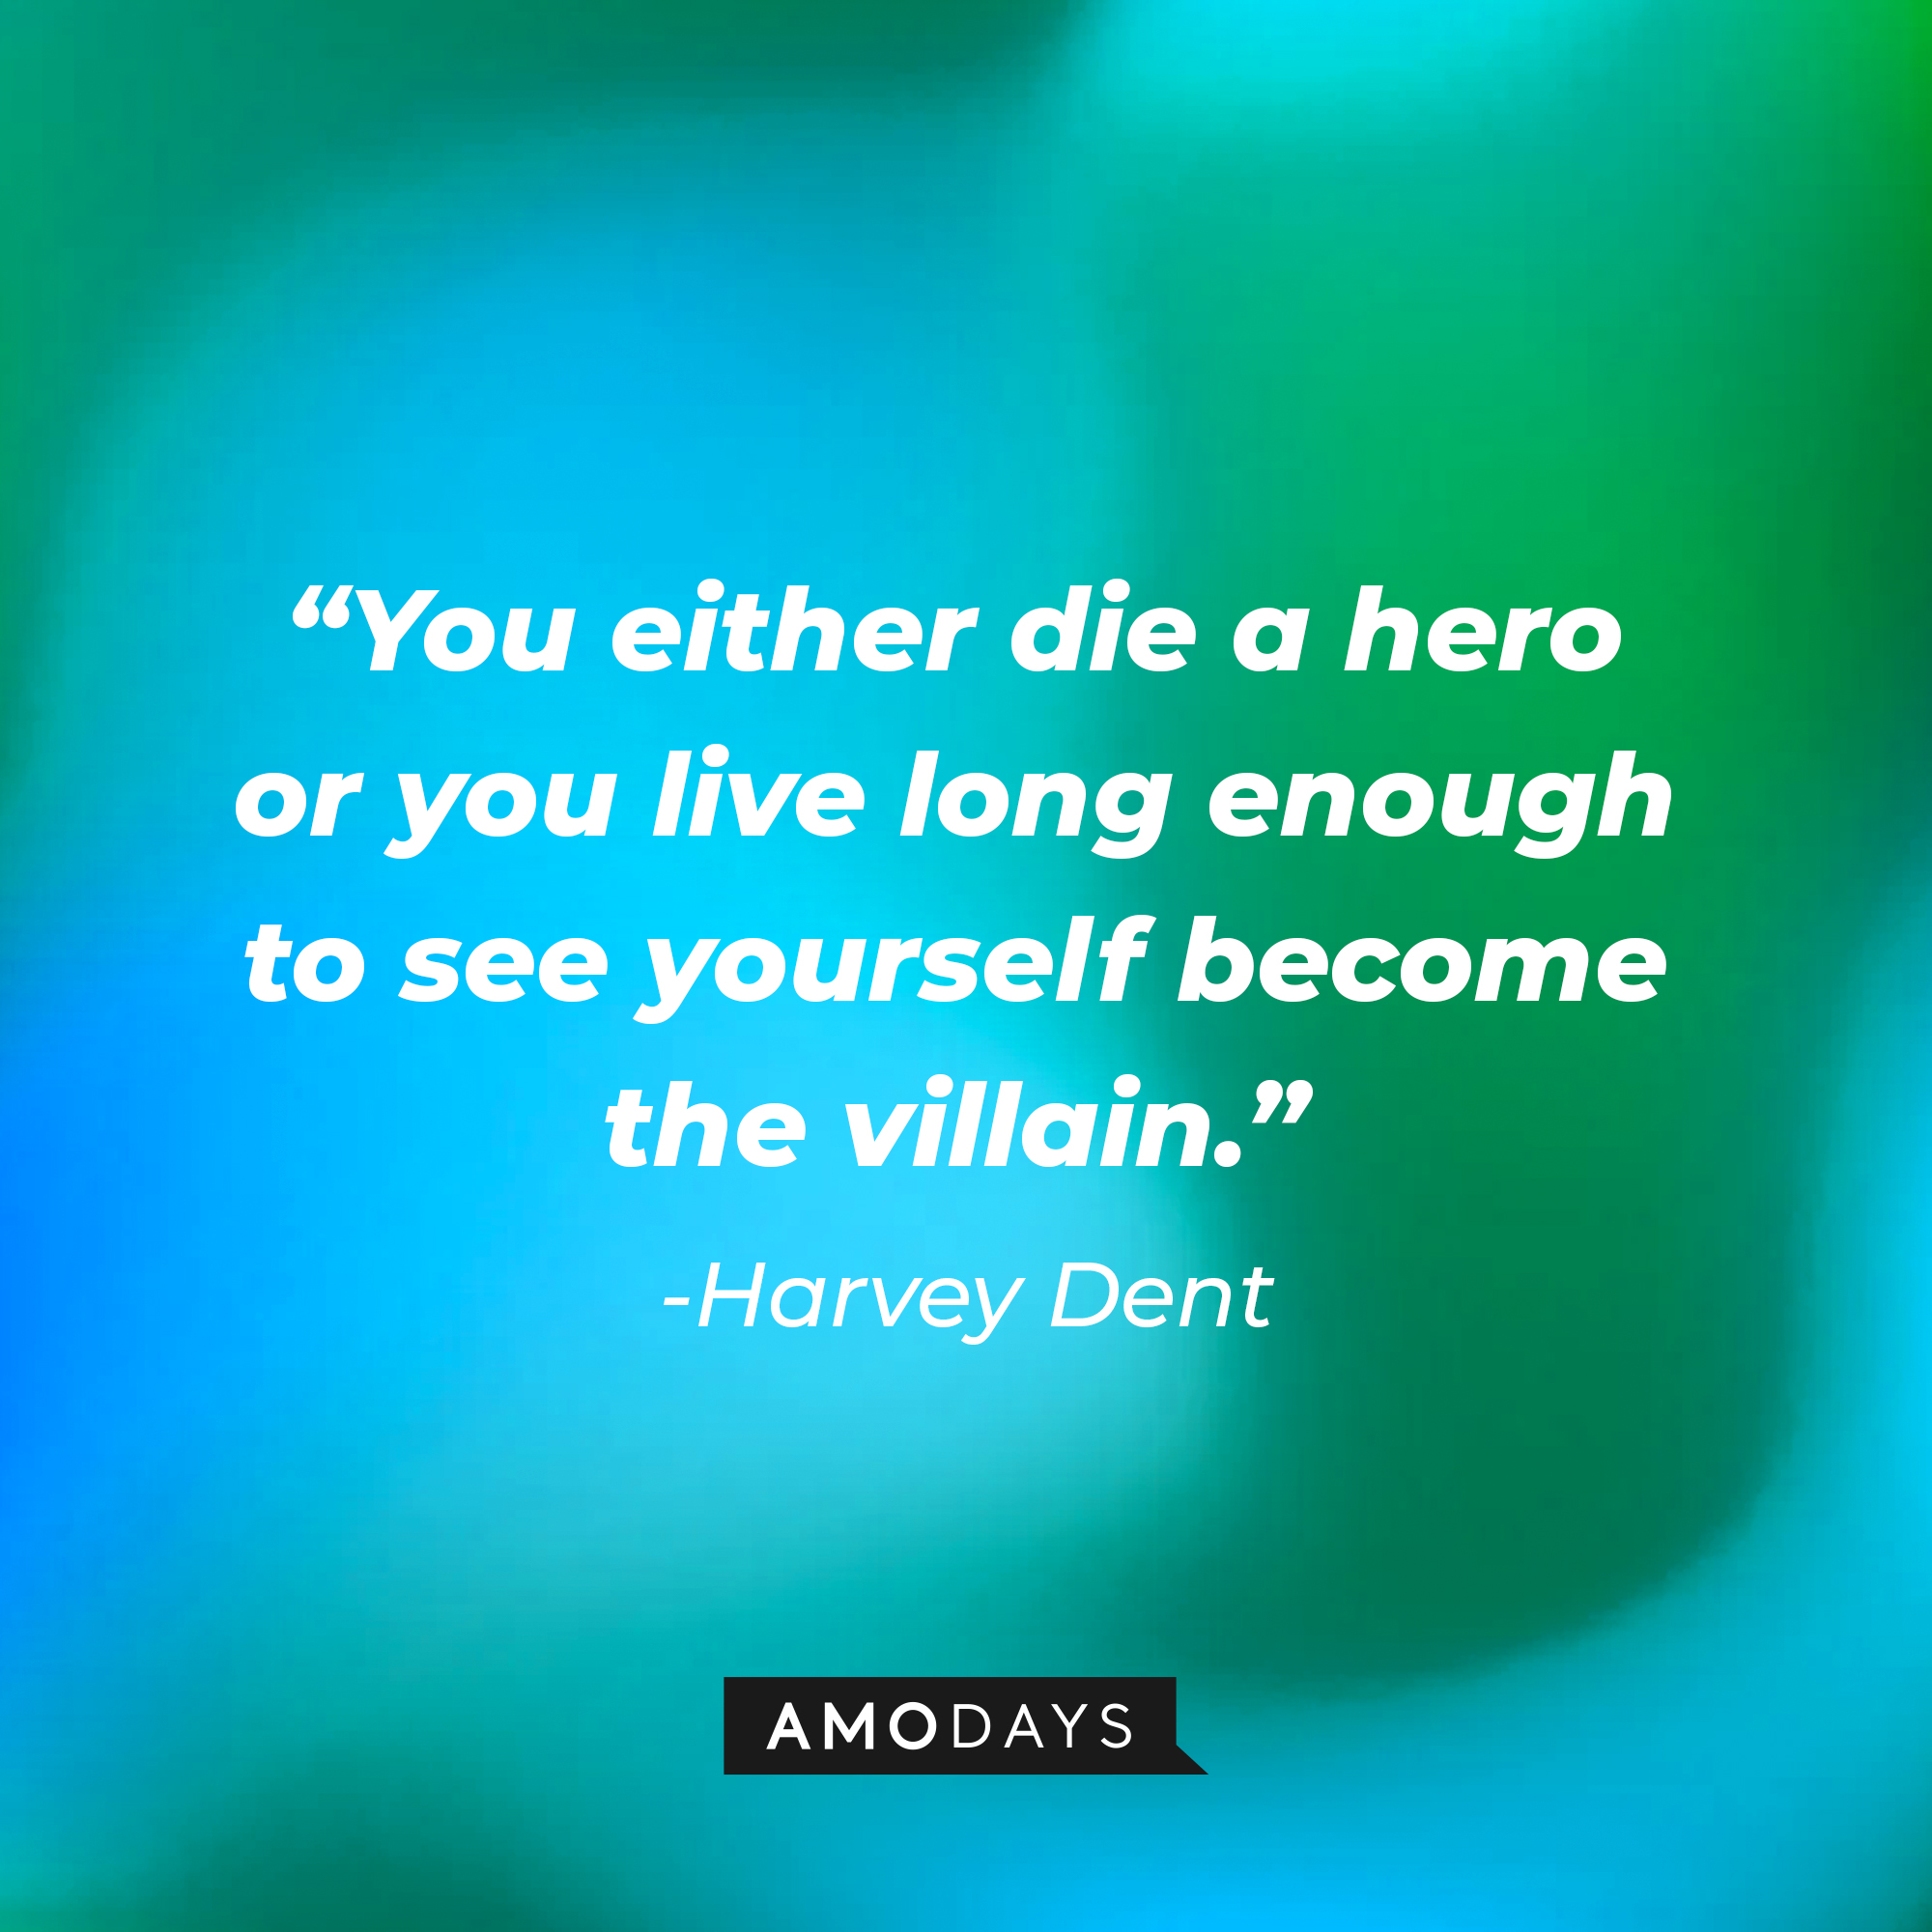 Harvey Dent's quote: “You either die a hero or you live long enough to see yourself become the villain.” | Source: Amodays